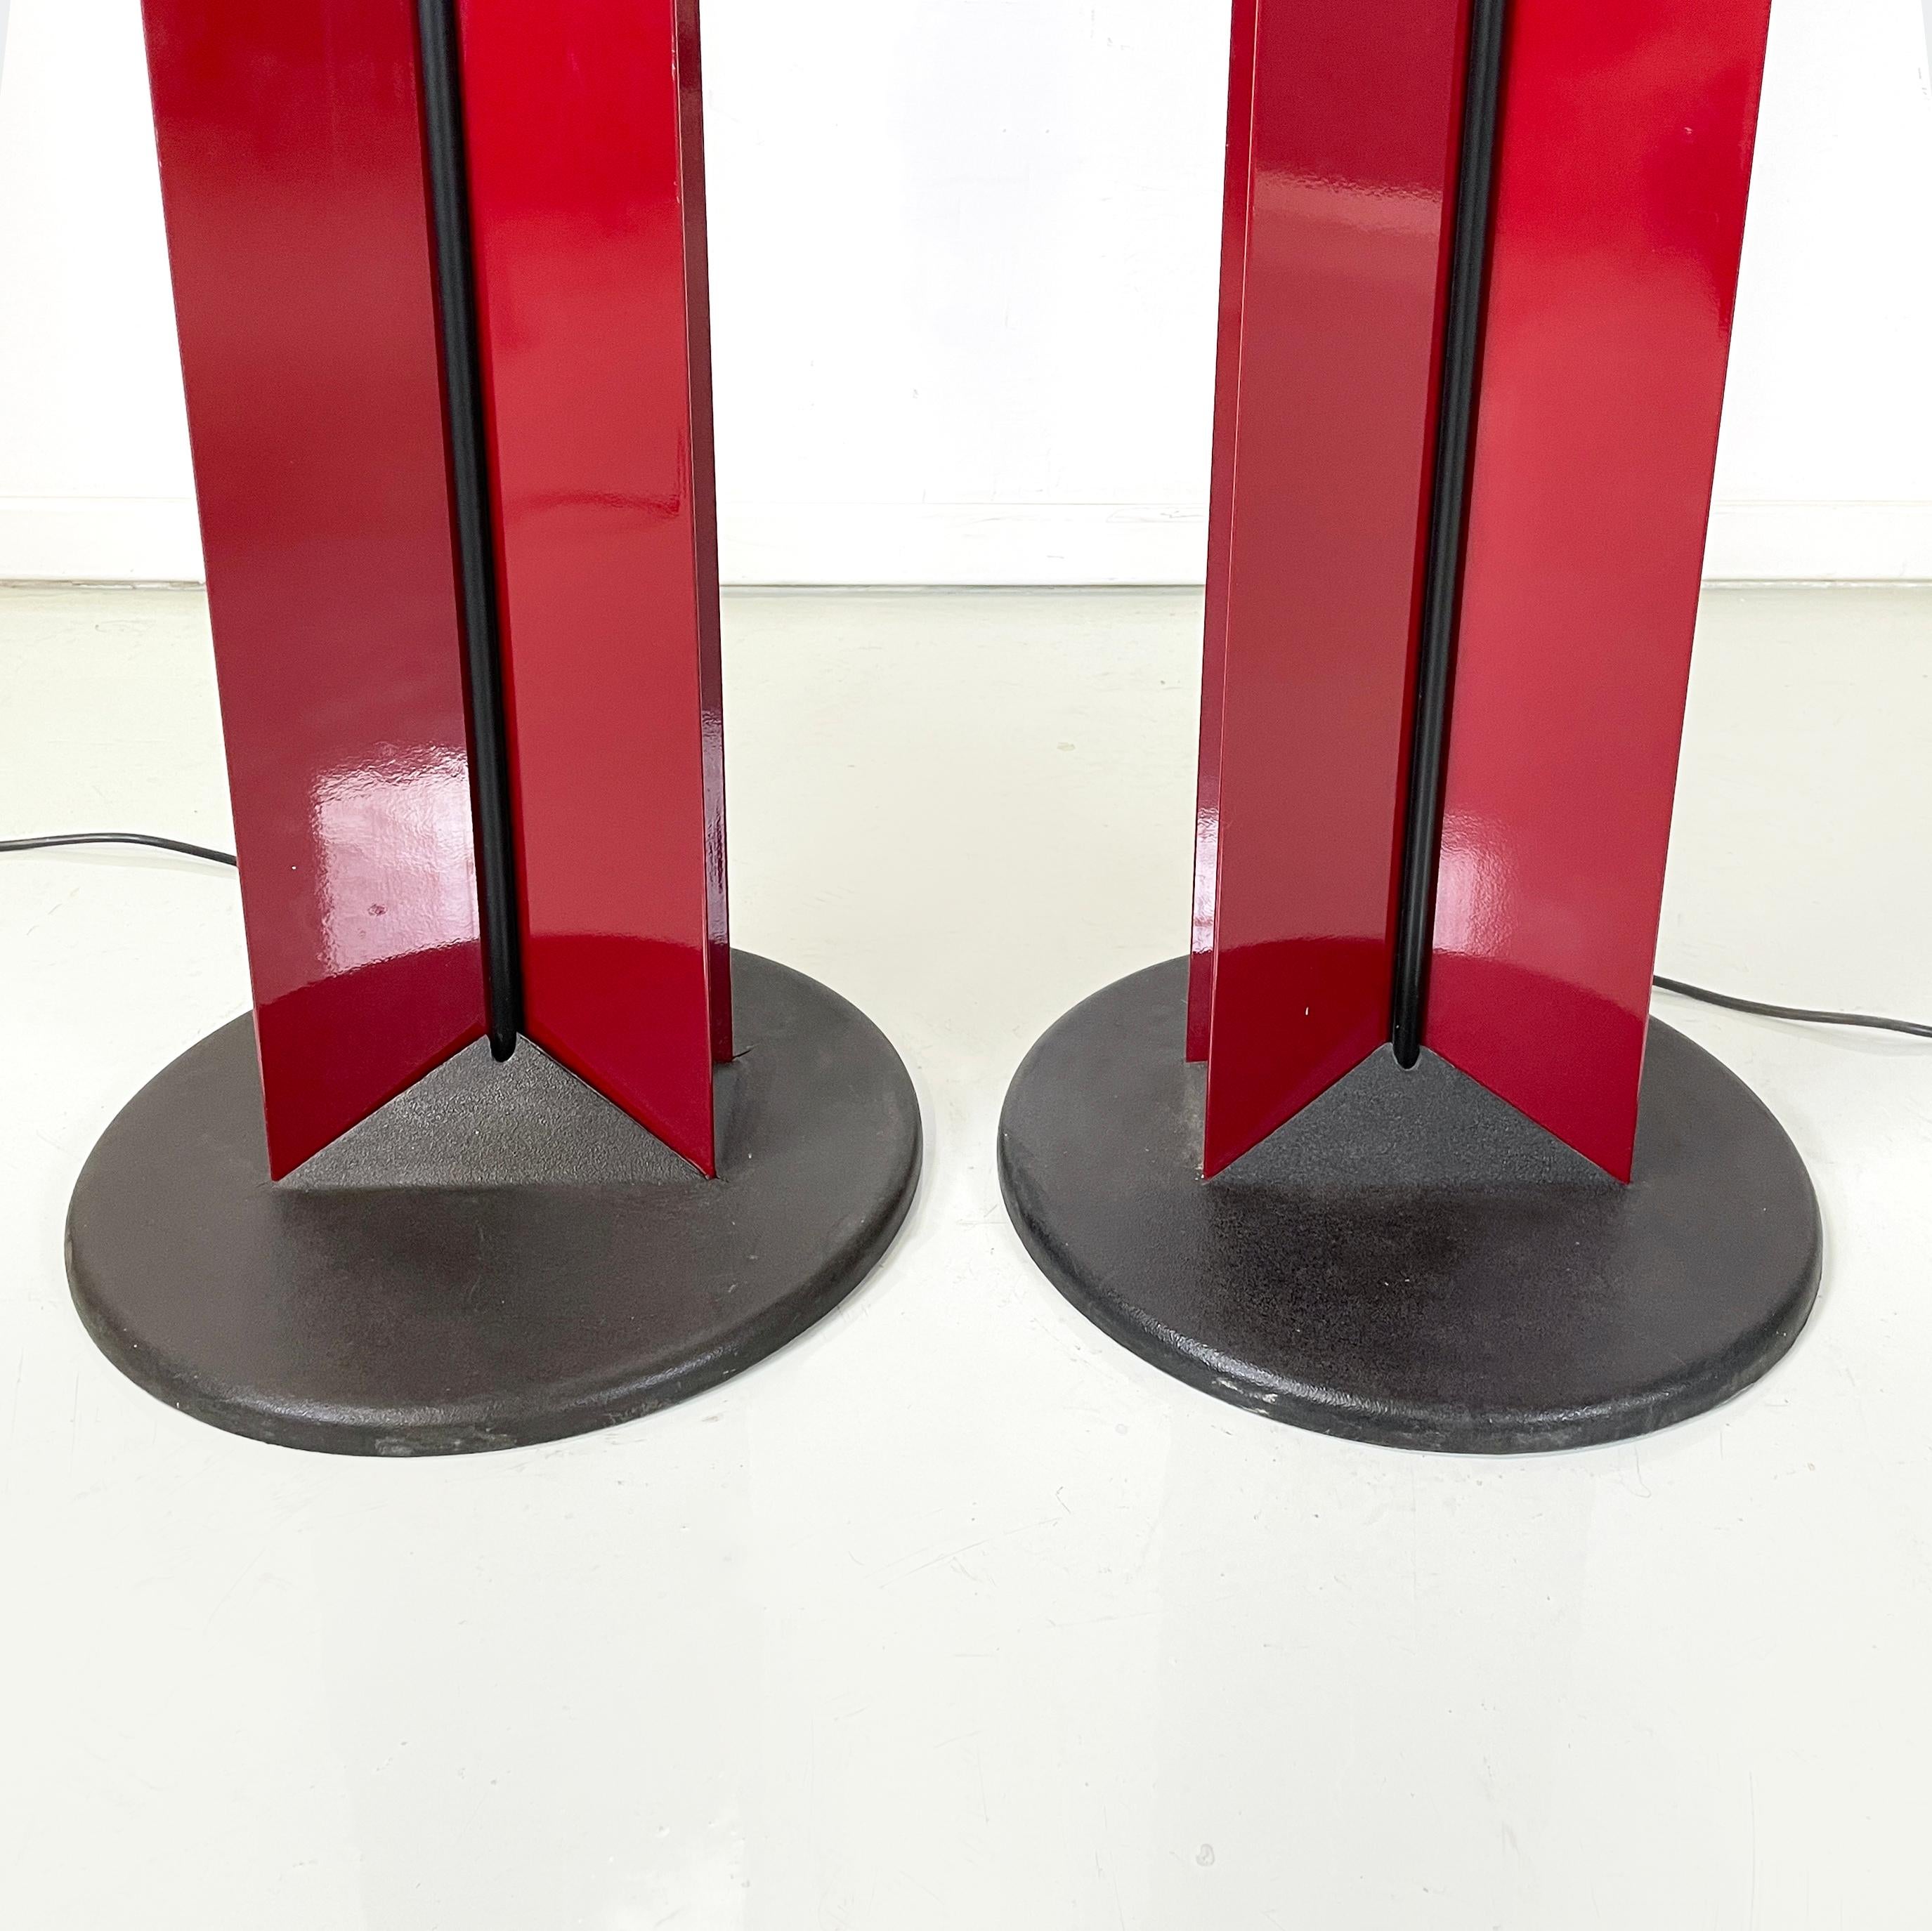 Italian modern Floor lamps in red metal and black plastic by Relco, 1990s For Sale 8